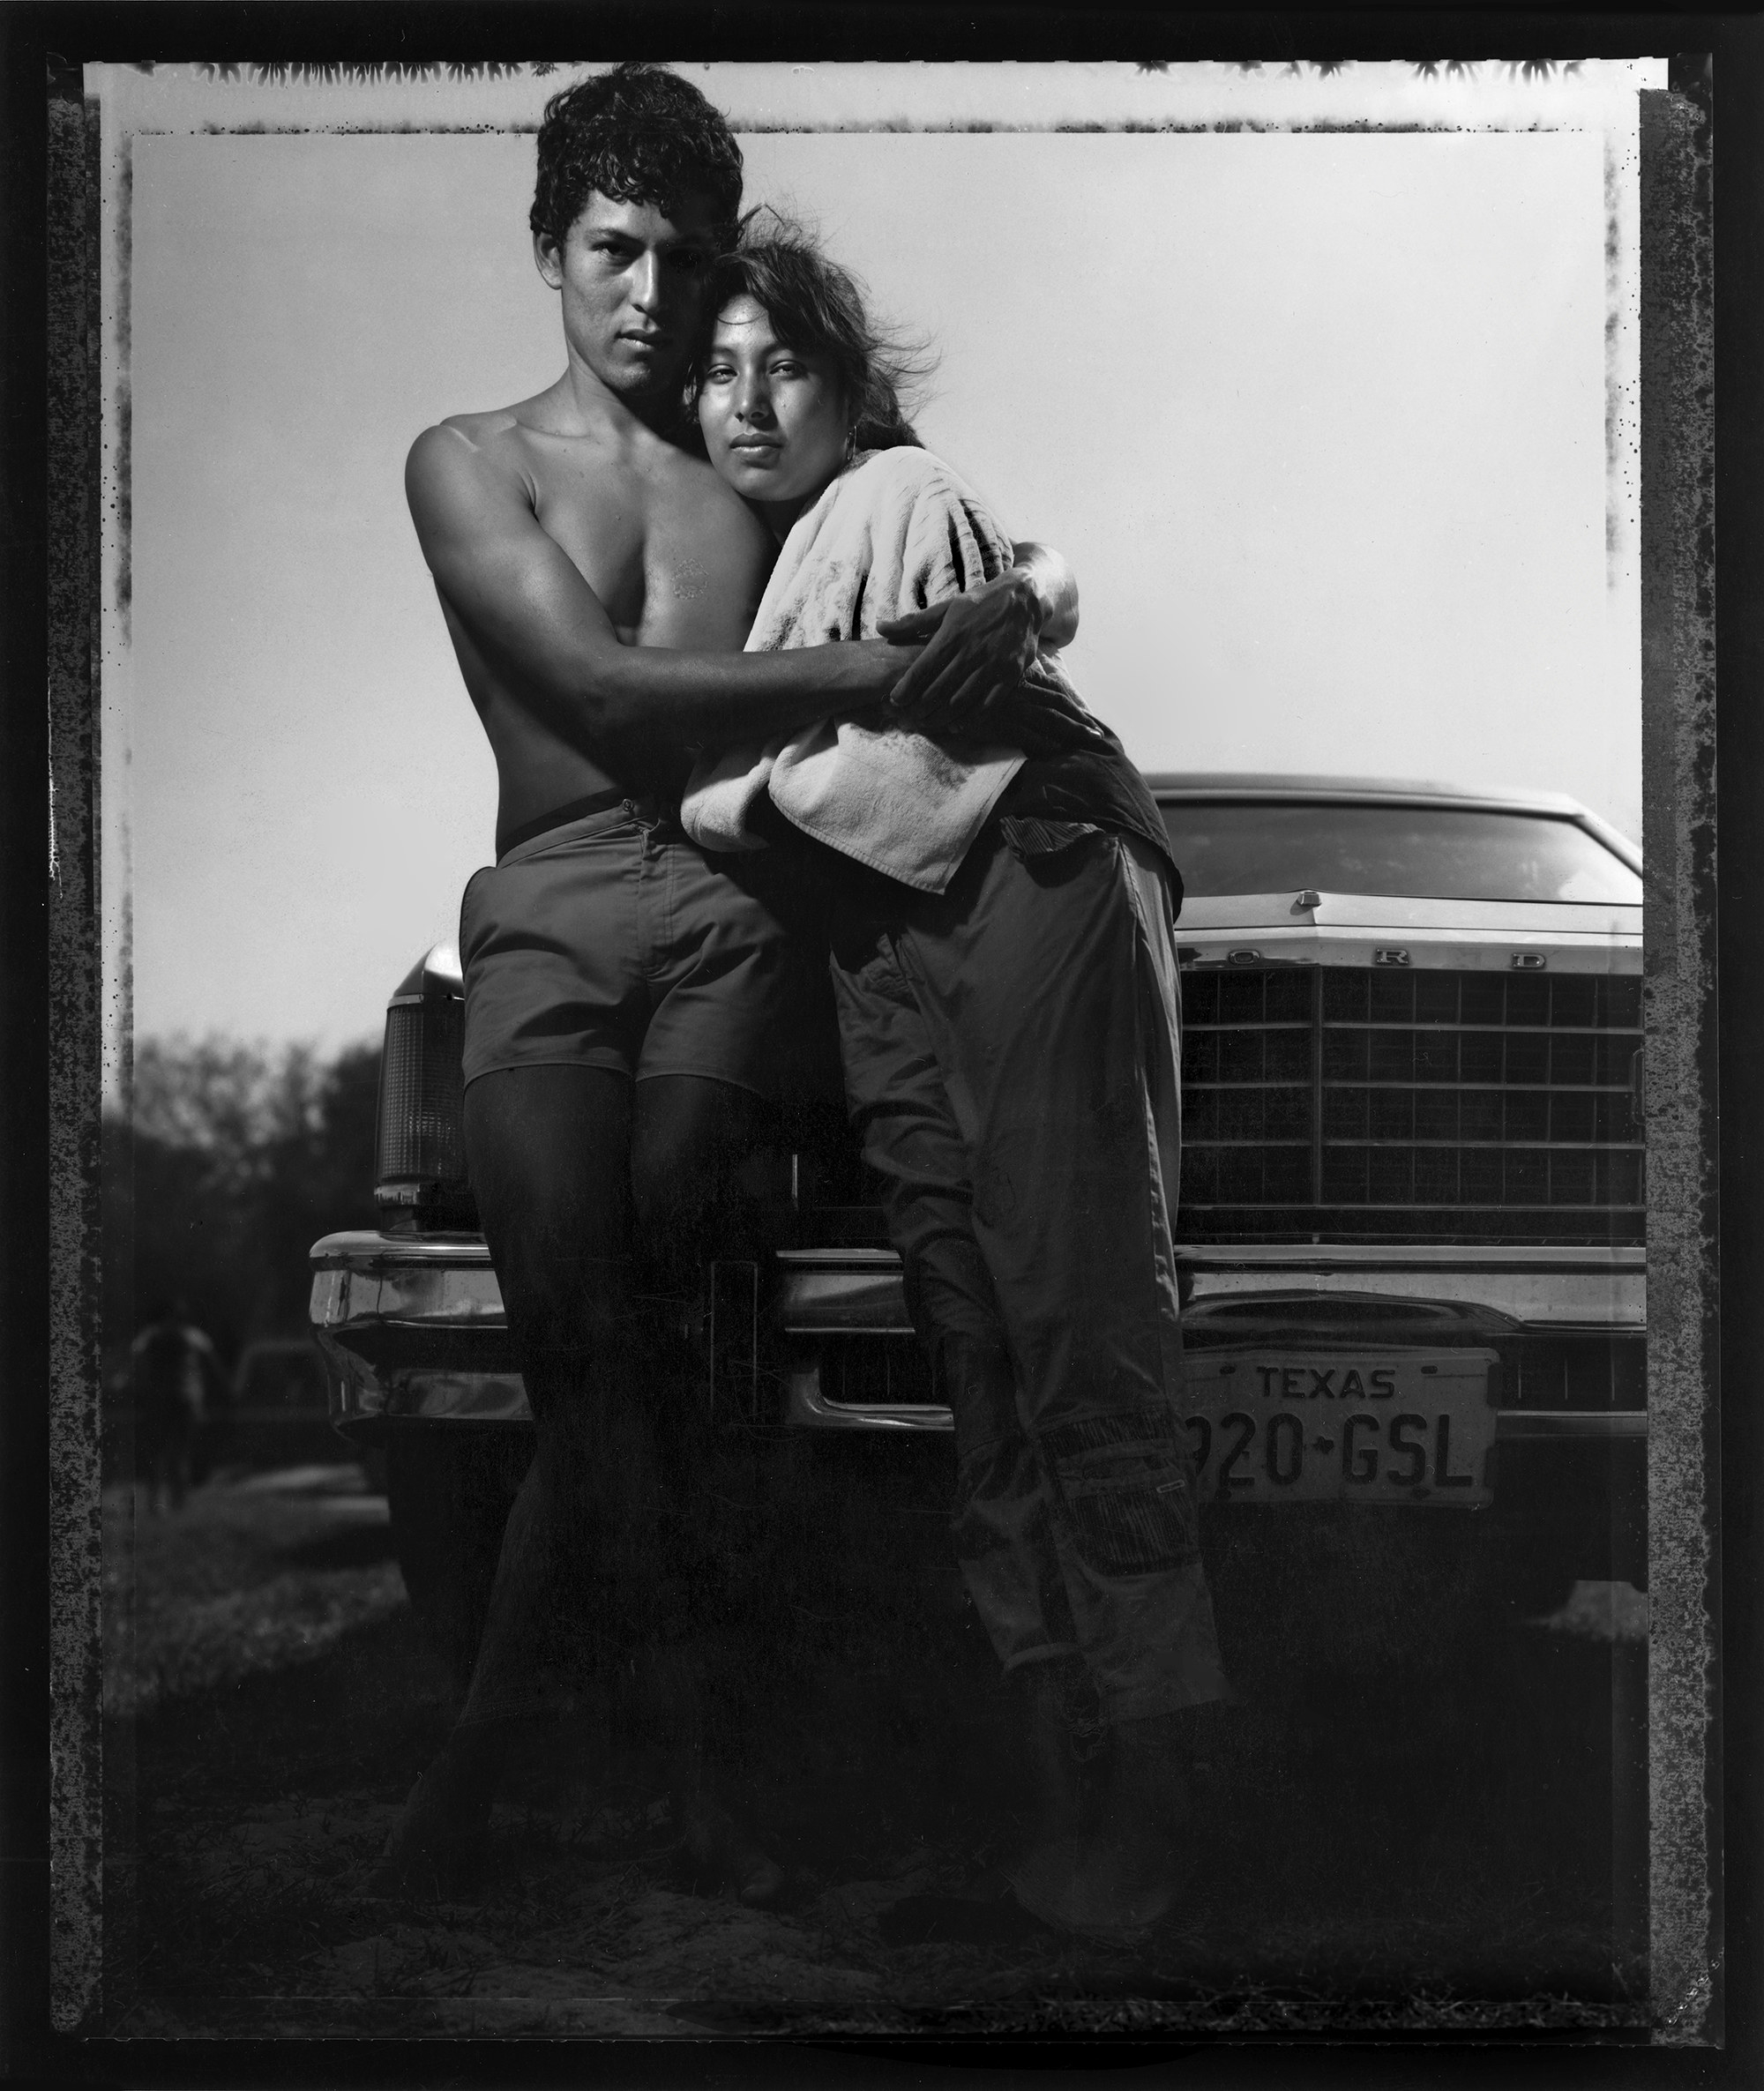 A young couple embracing in front of a car outside